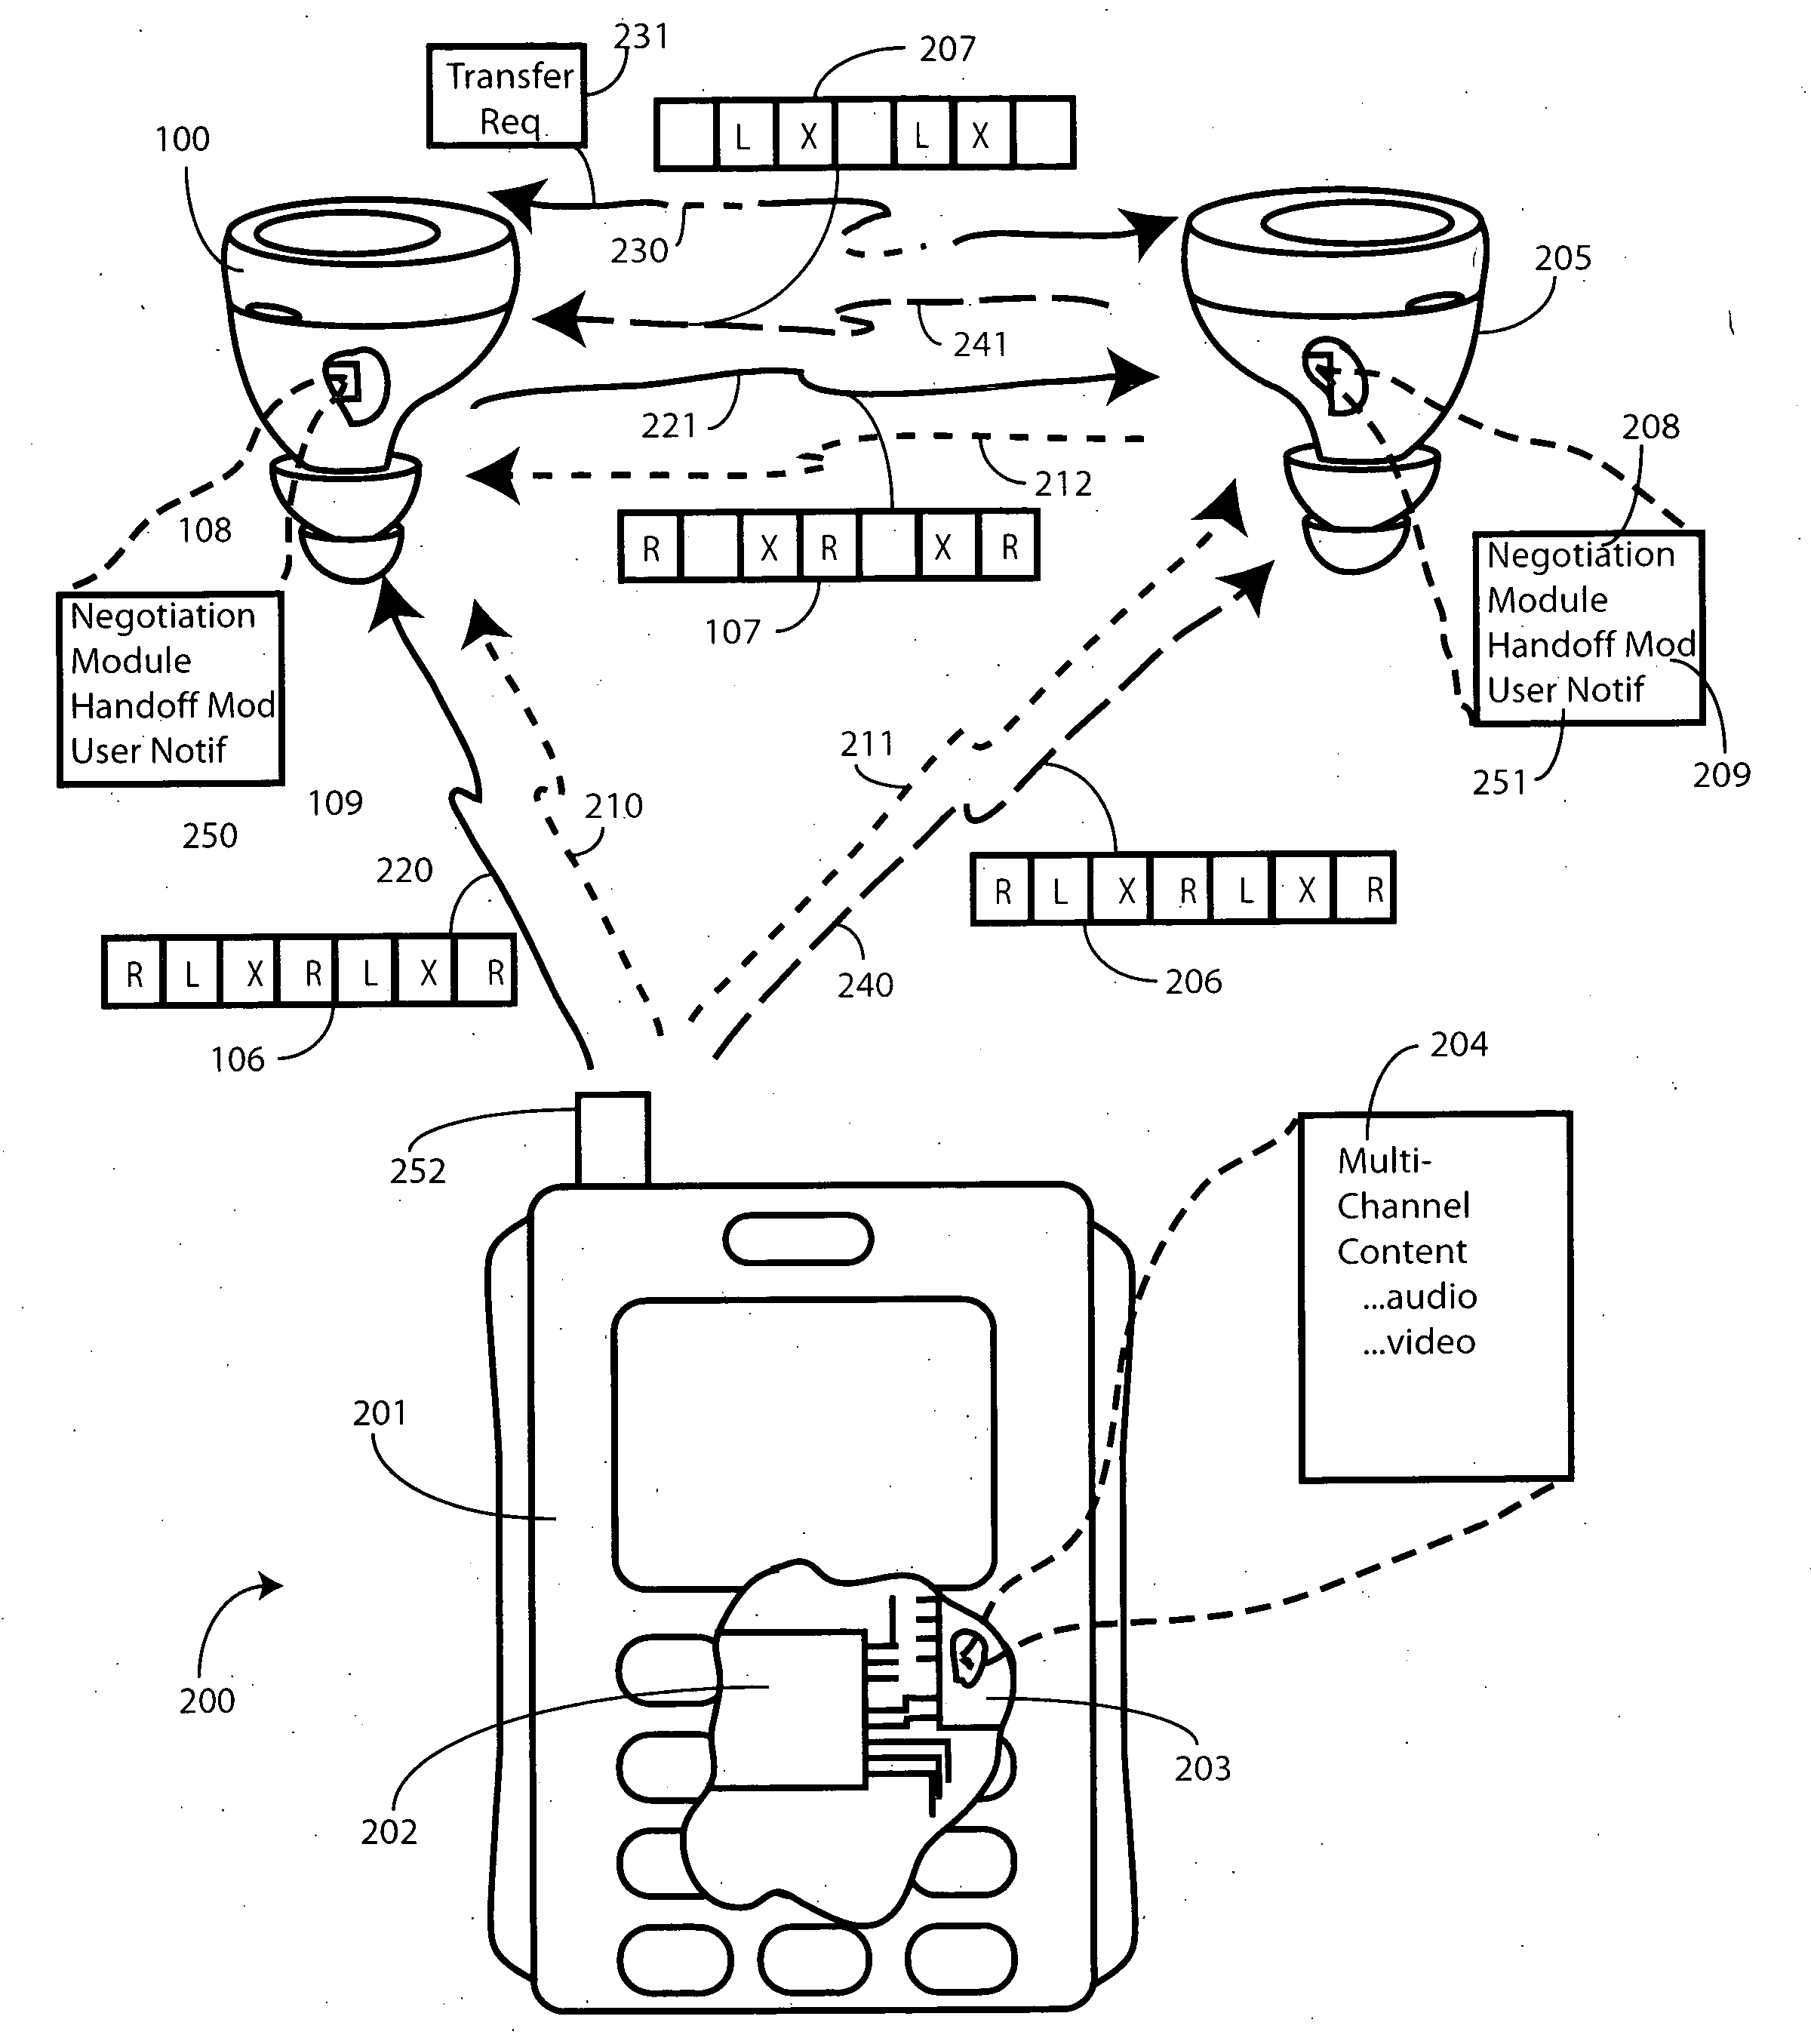 Method and apparatus for wirelessly streaming multi-channel content